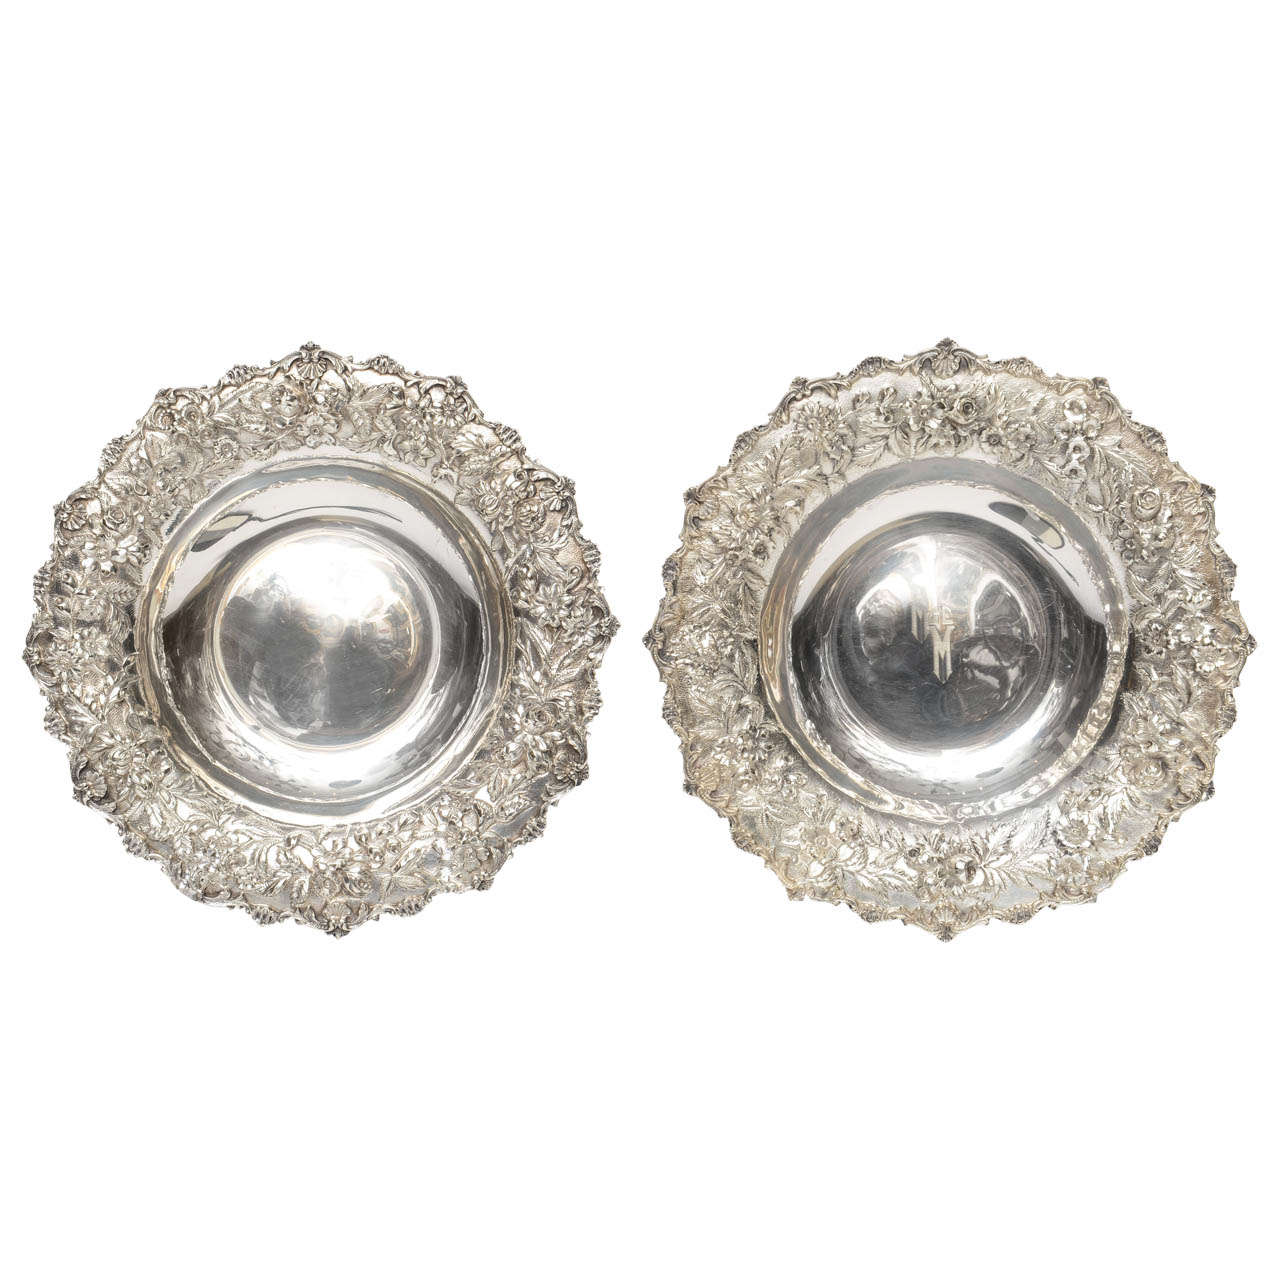 Pair of Sterling Silver Bowls, Repousse Design, 20th Century For Sale